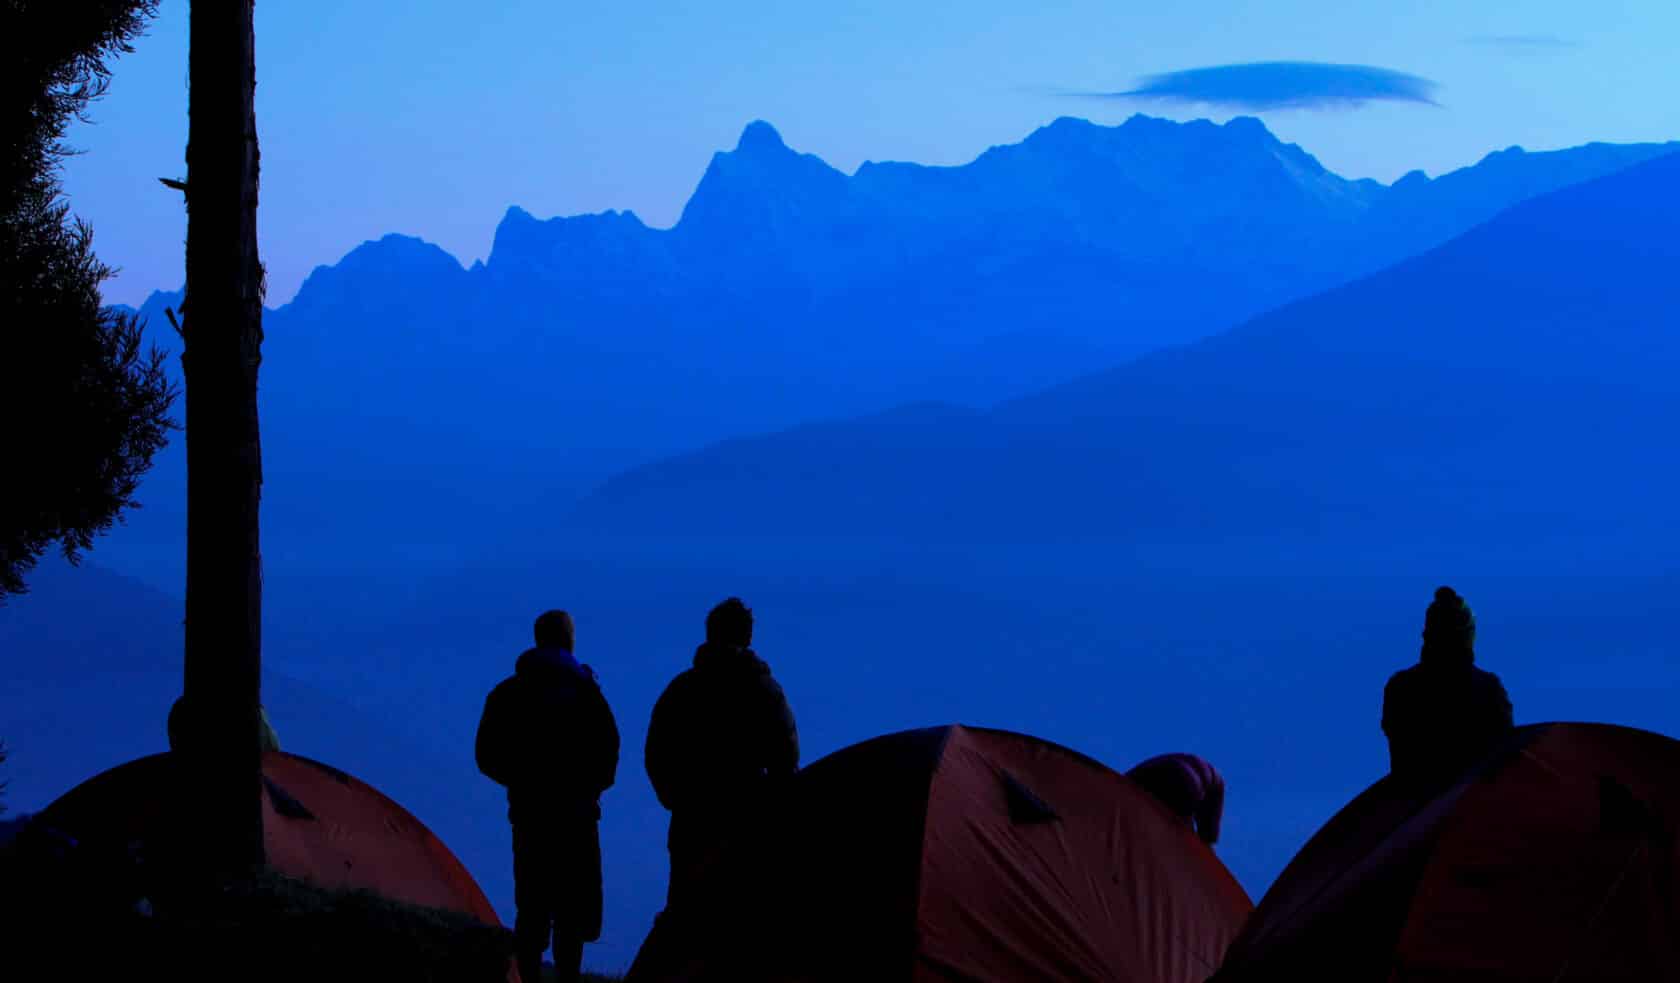 People admiring a view of mountains at dawn.